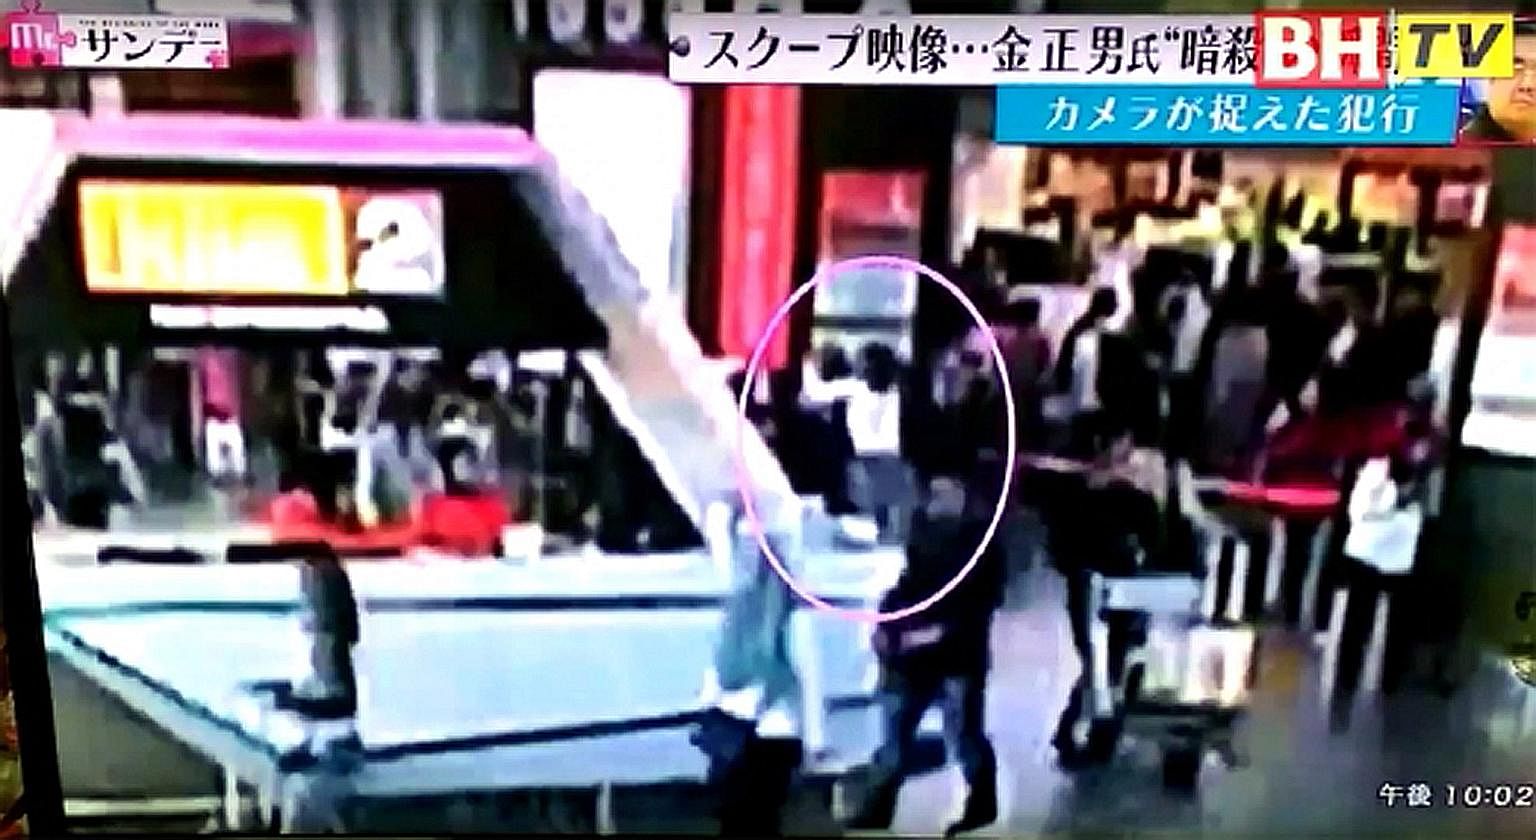 Screen grabs of grainy video clips supposedly showing Mr Kim Jong Nam (circled in photo on the left) and the woman suspect (right) linked to his death at the Kuala Lumpur International Airport in February 2017.